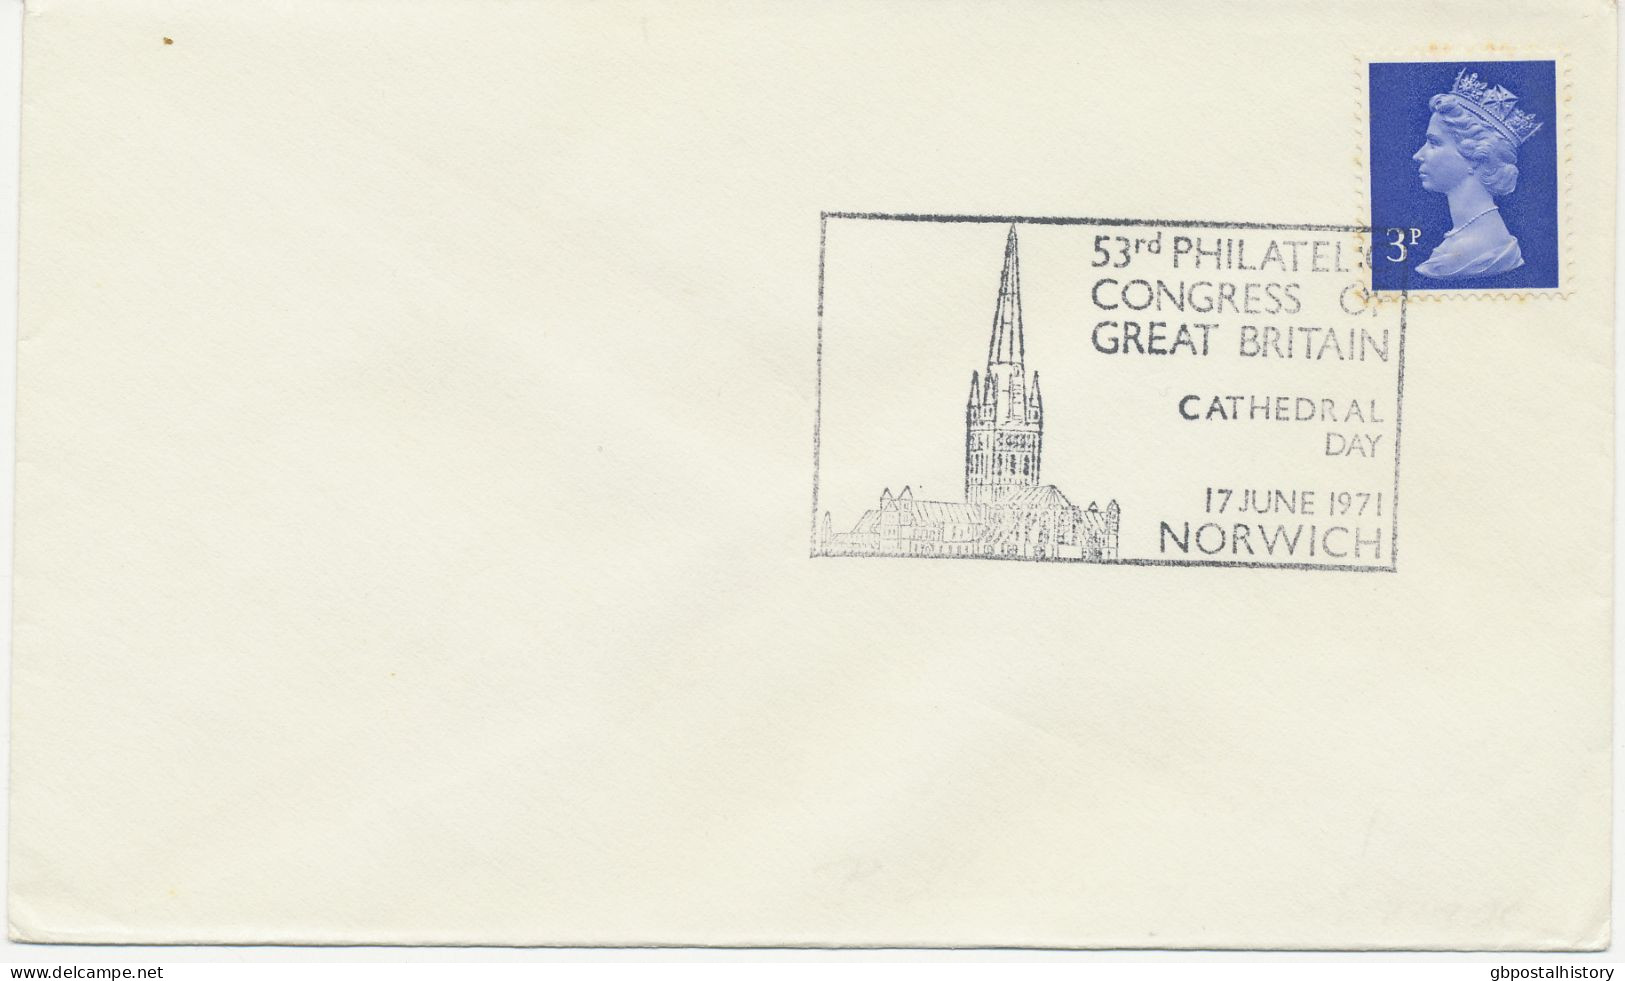 GB SPECIAL EVENT POSTMARKS 1971 53RD PHILATELIC CONGRESS OF GREAT BRITAIN NORWICH - CATHEDRAL DAY - Covers & Documents